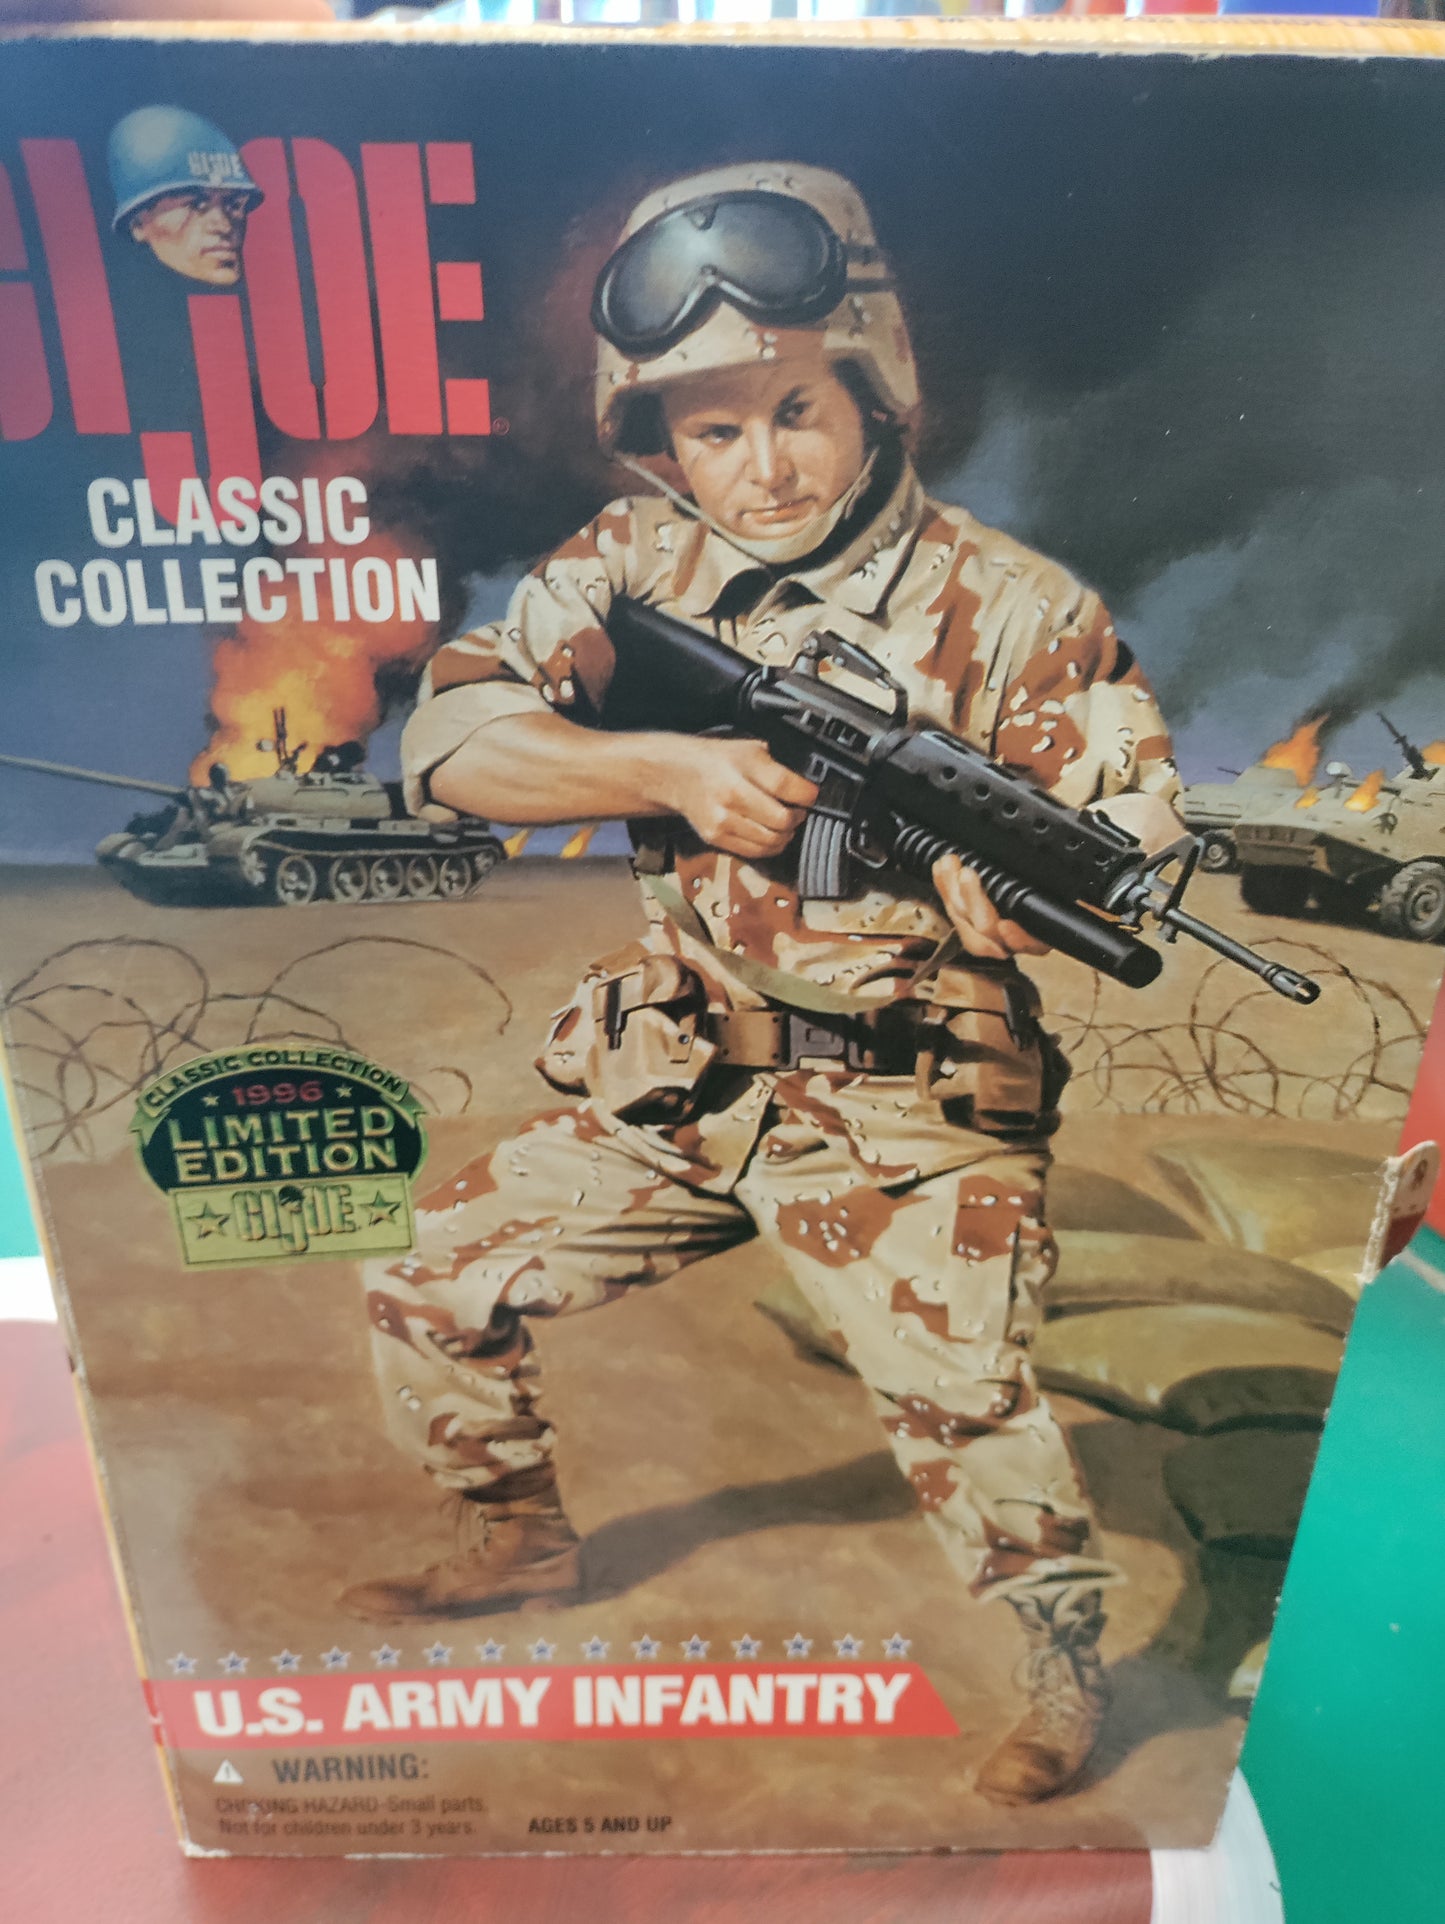 GiJoe Classic Collection U.S. Army Infantry